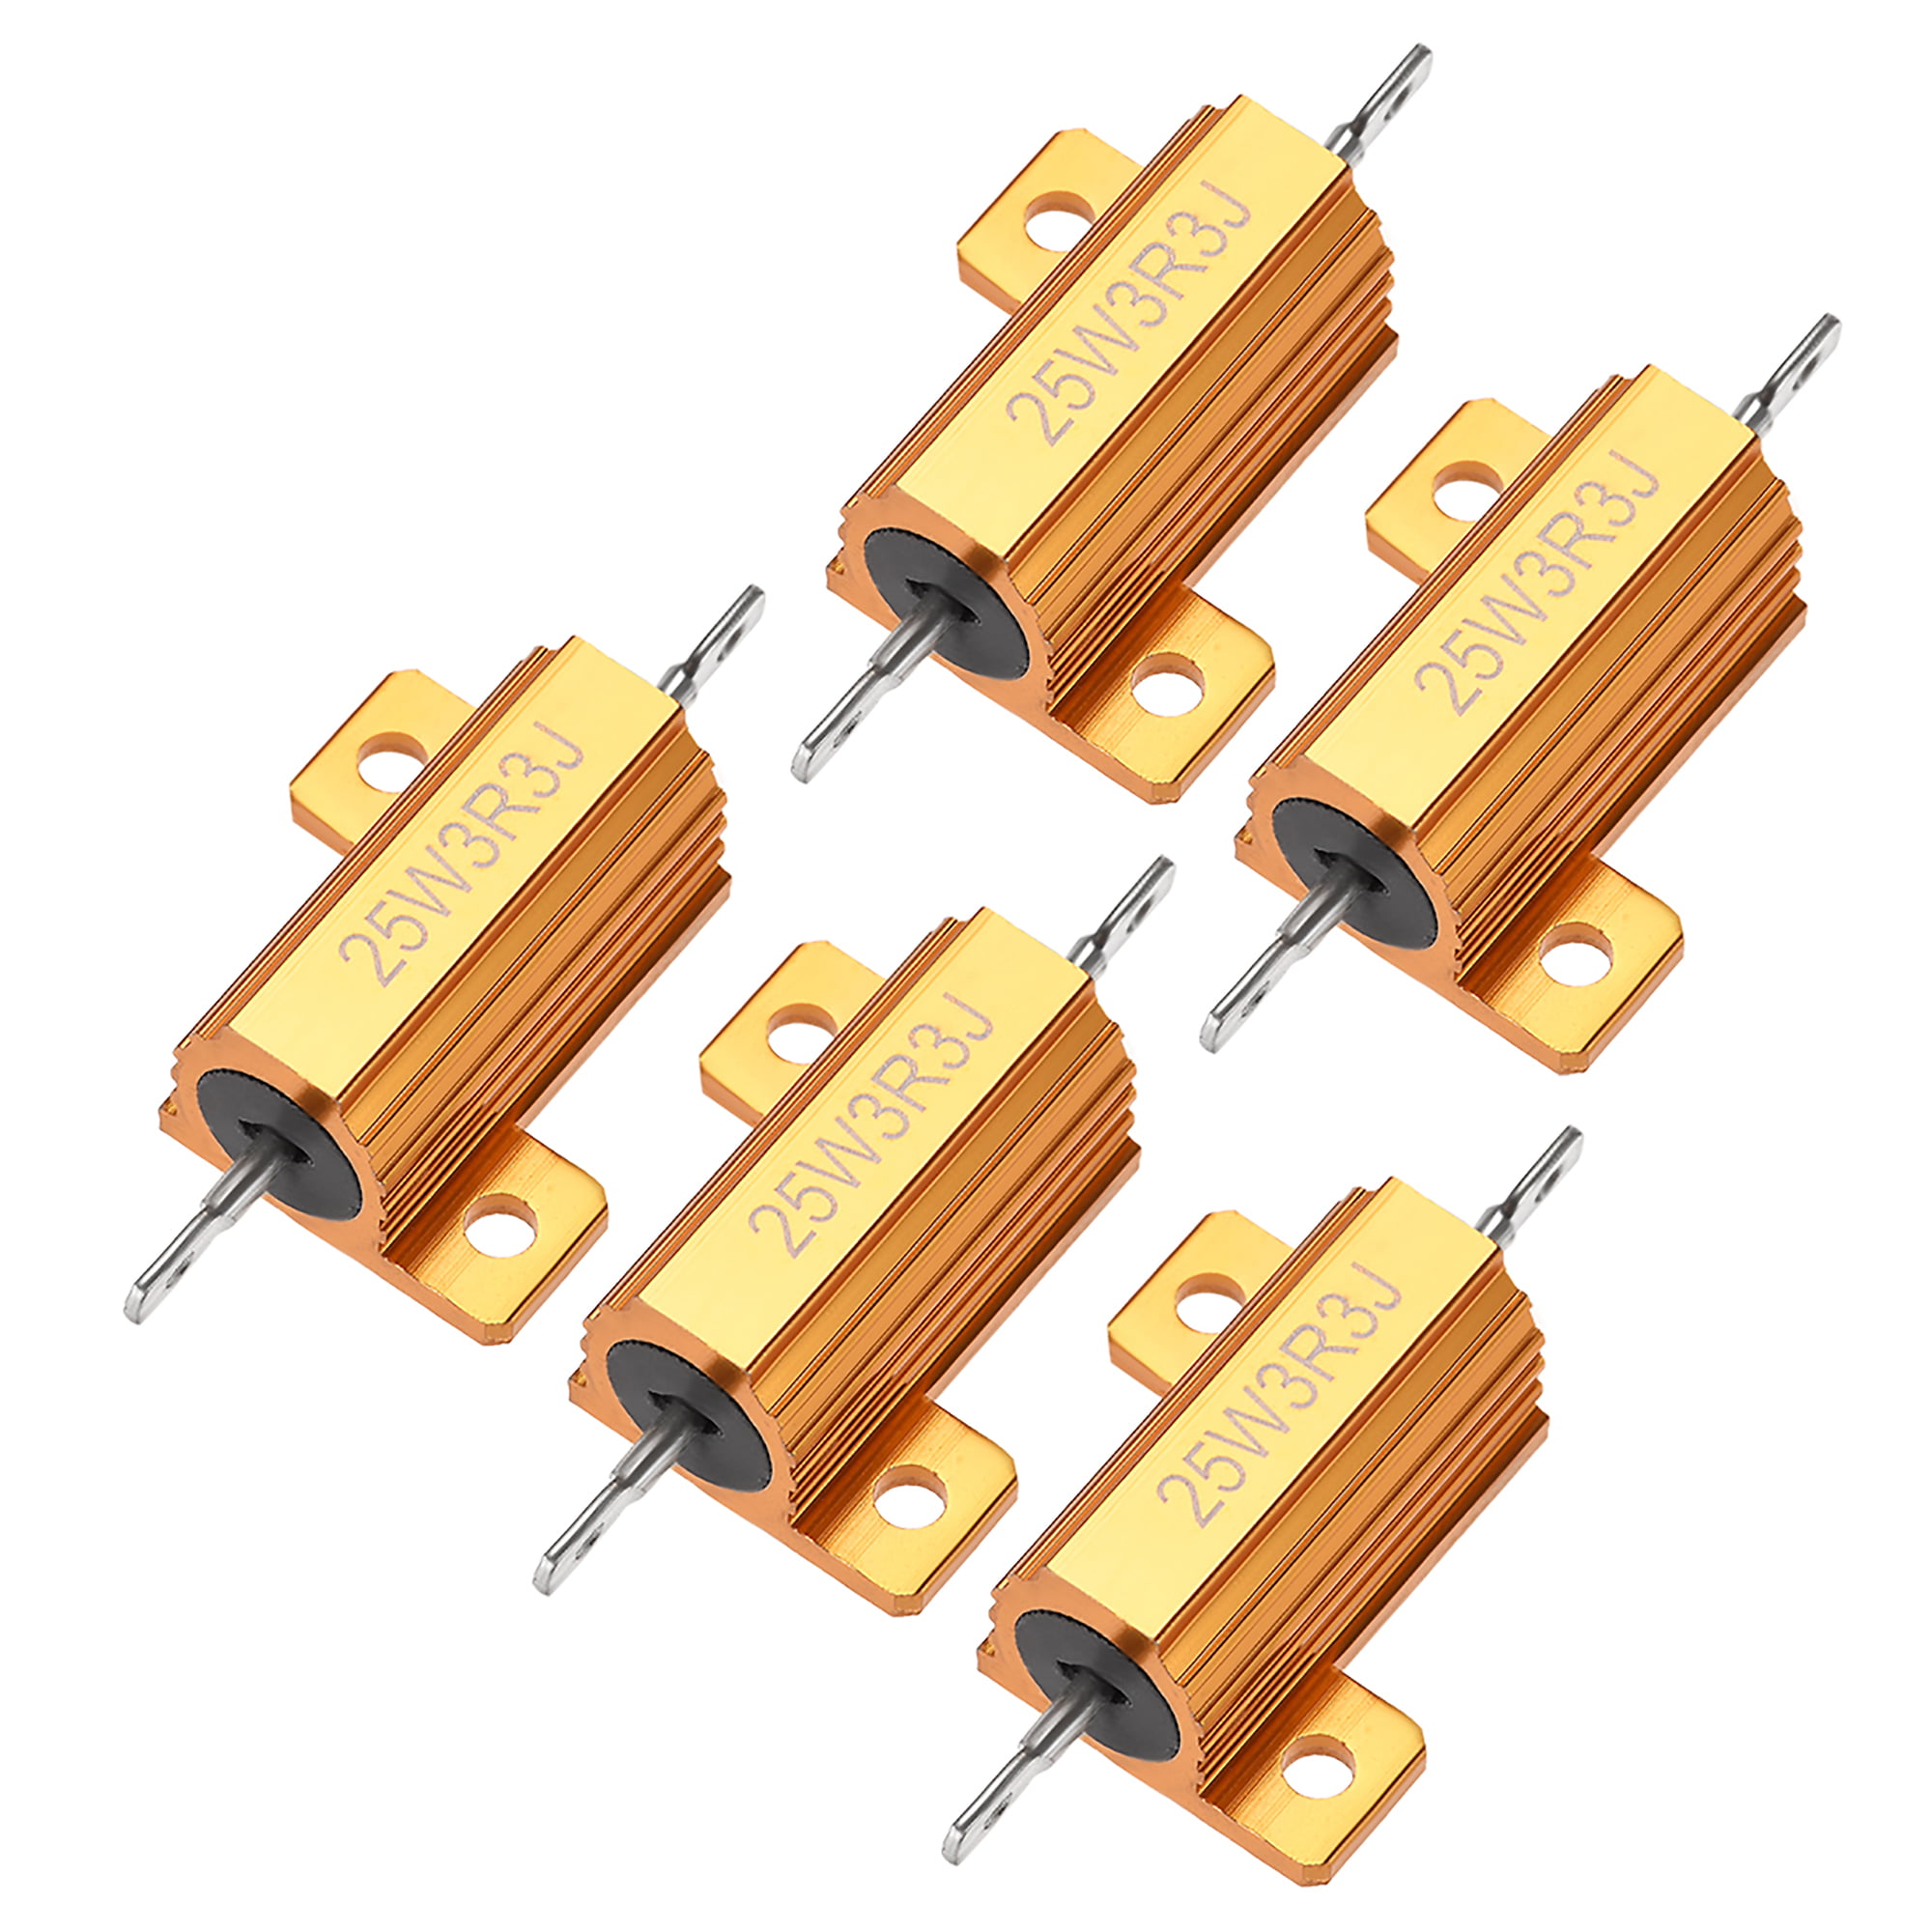 sourcing map 25W 0.1 Ohm 5% Aluminum Housing Resistor Screw Tap Chassis Mounted Aluminum Case Wirewound Resistor Load Resistors Green 2 pcs